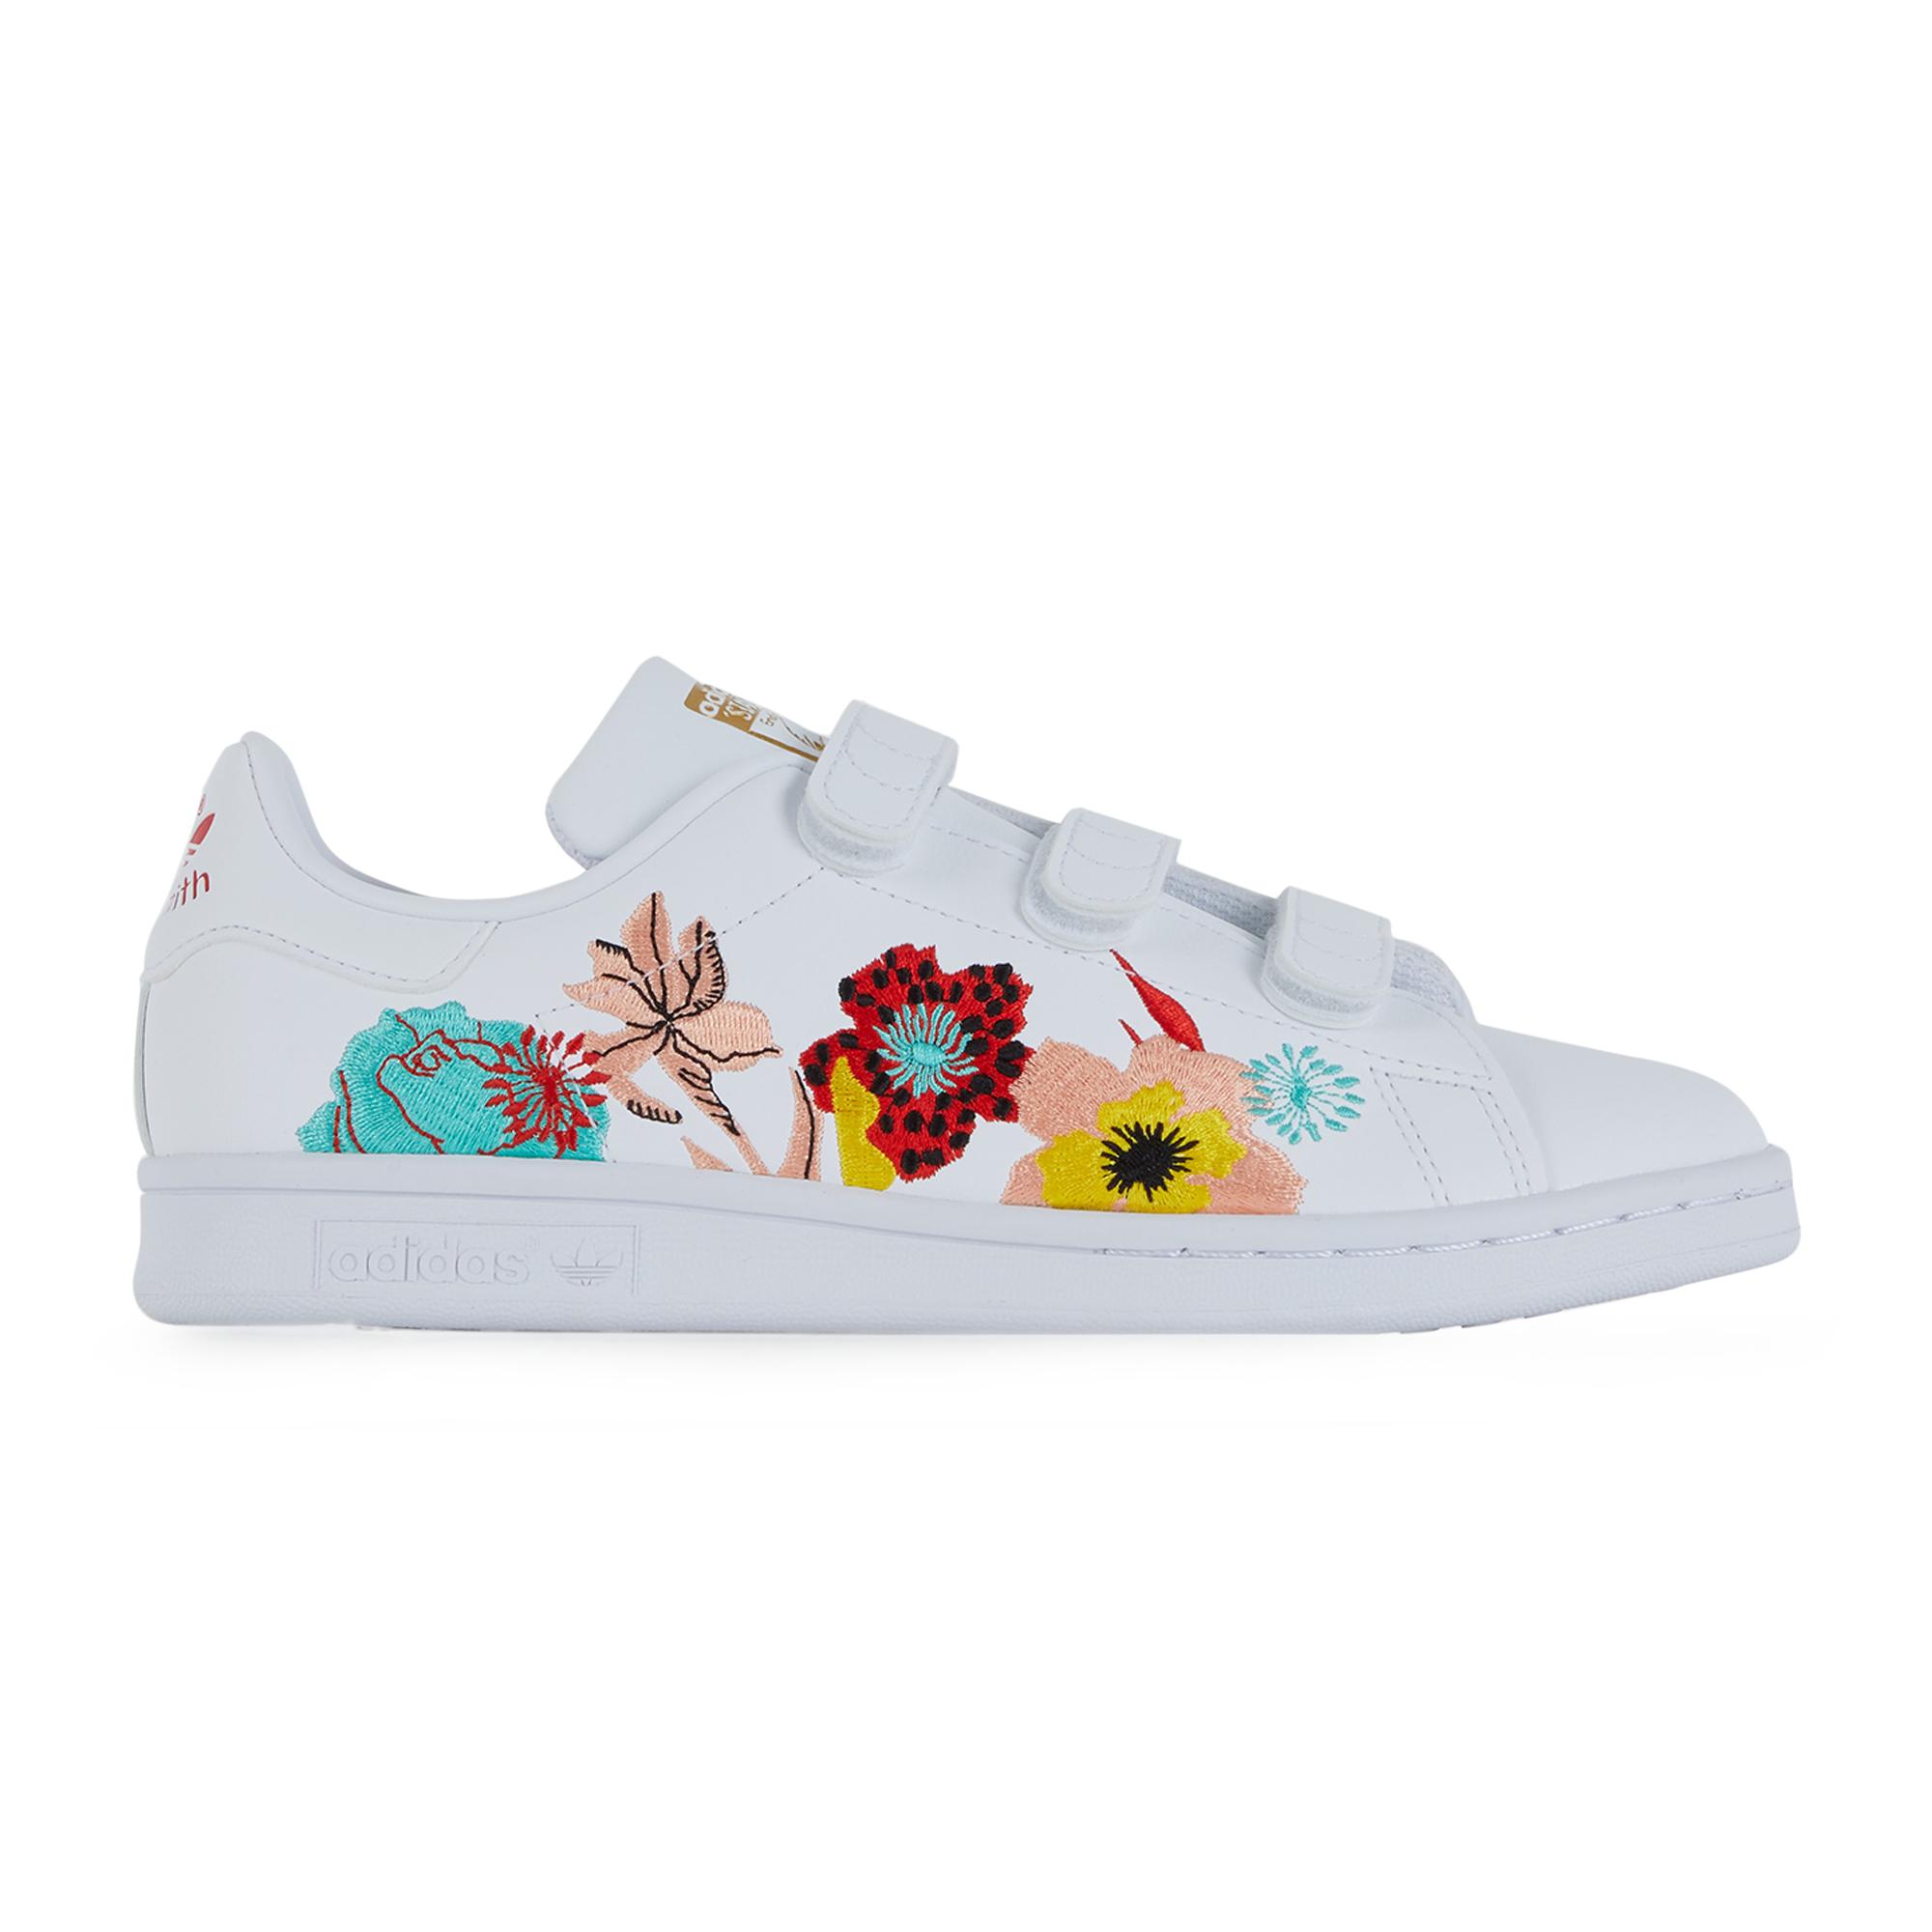 Stan Smith Cf Floral Outlet, SAVE 59% - lutheranems.com